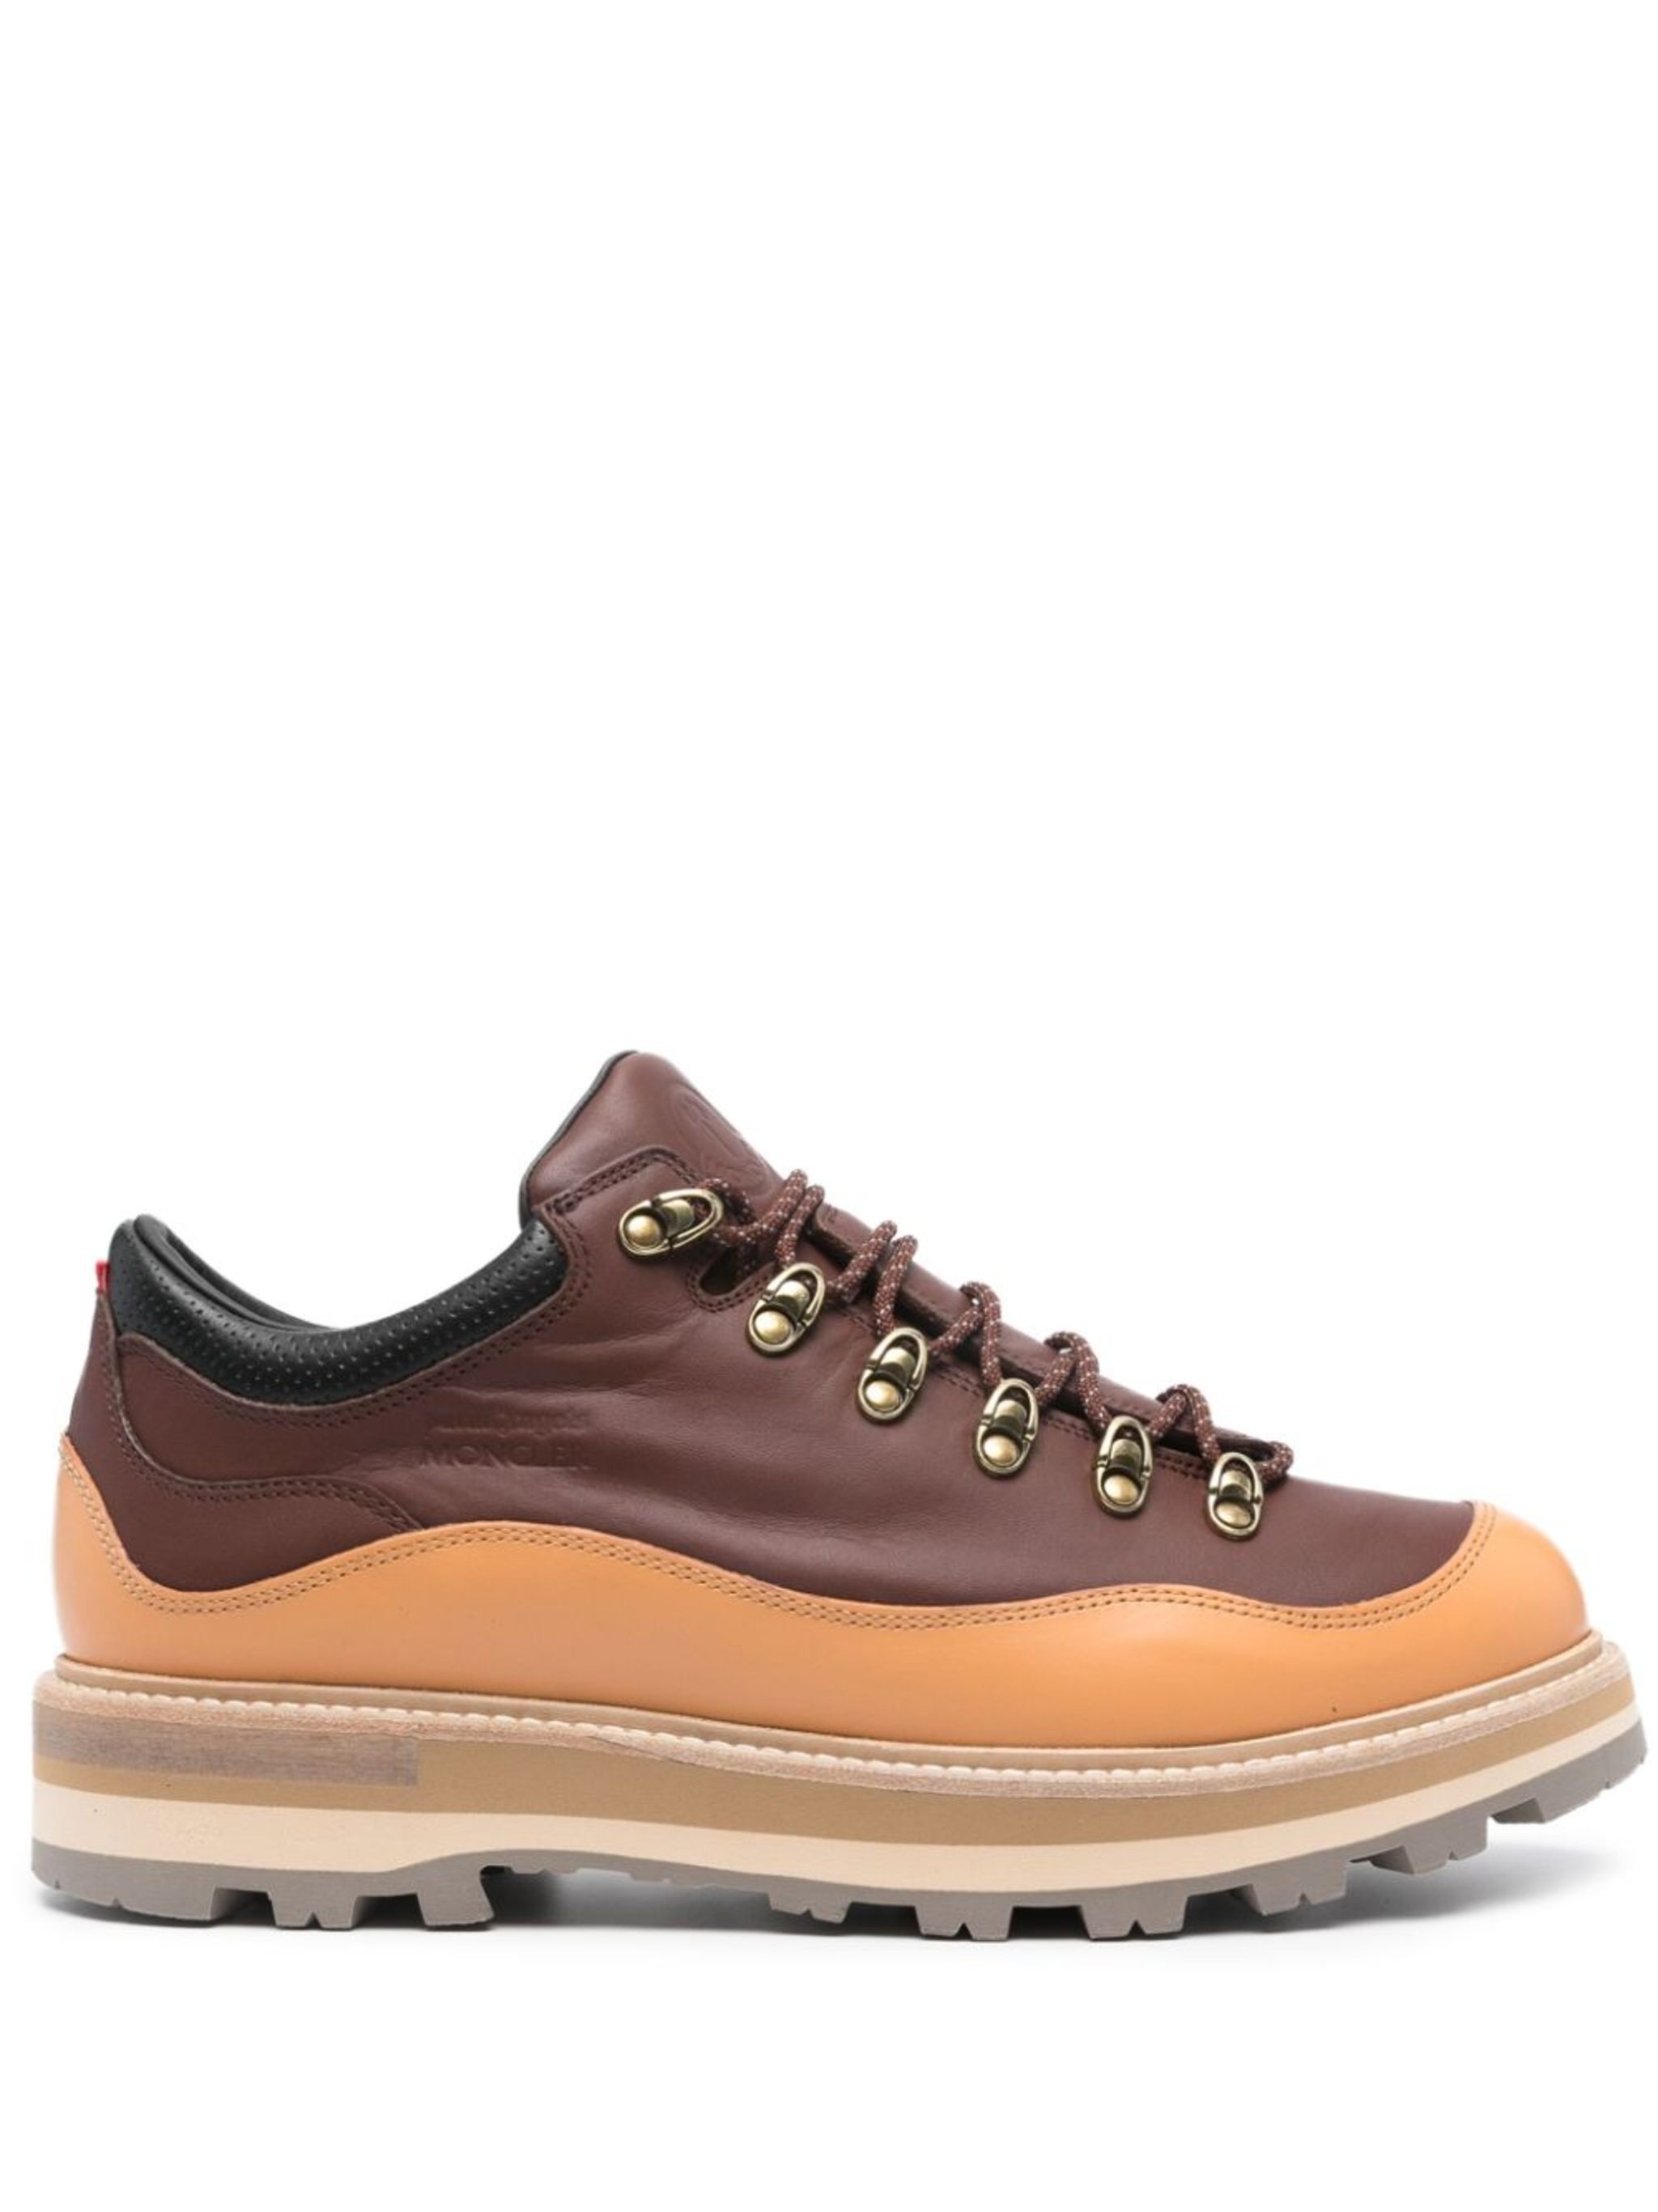 panelled leather sneakers - 1